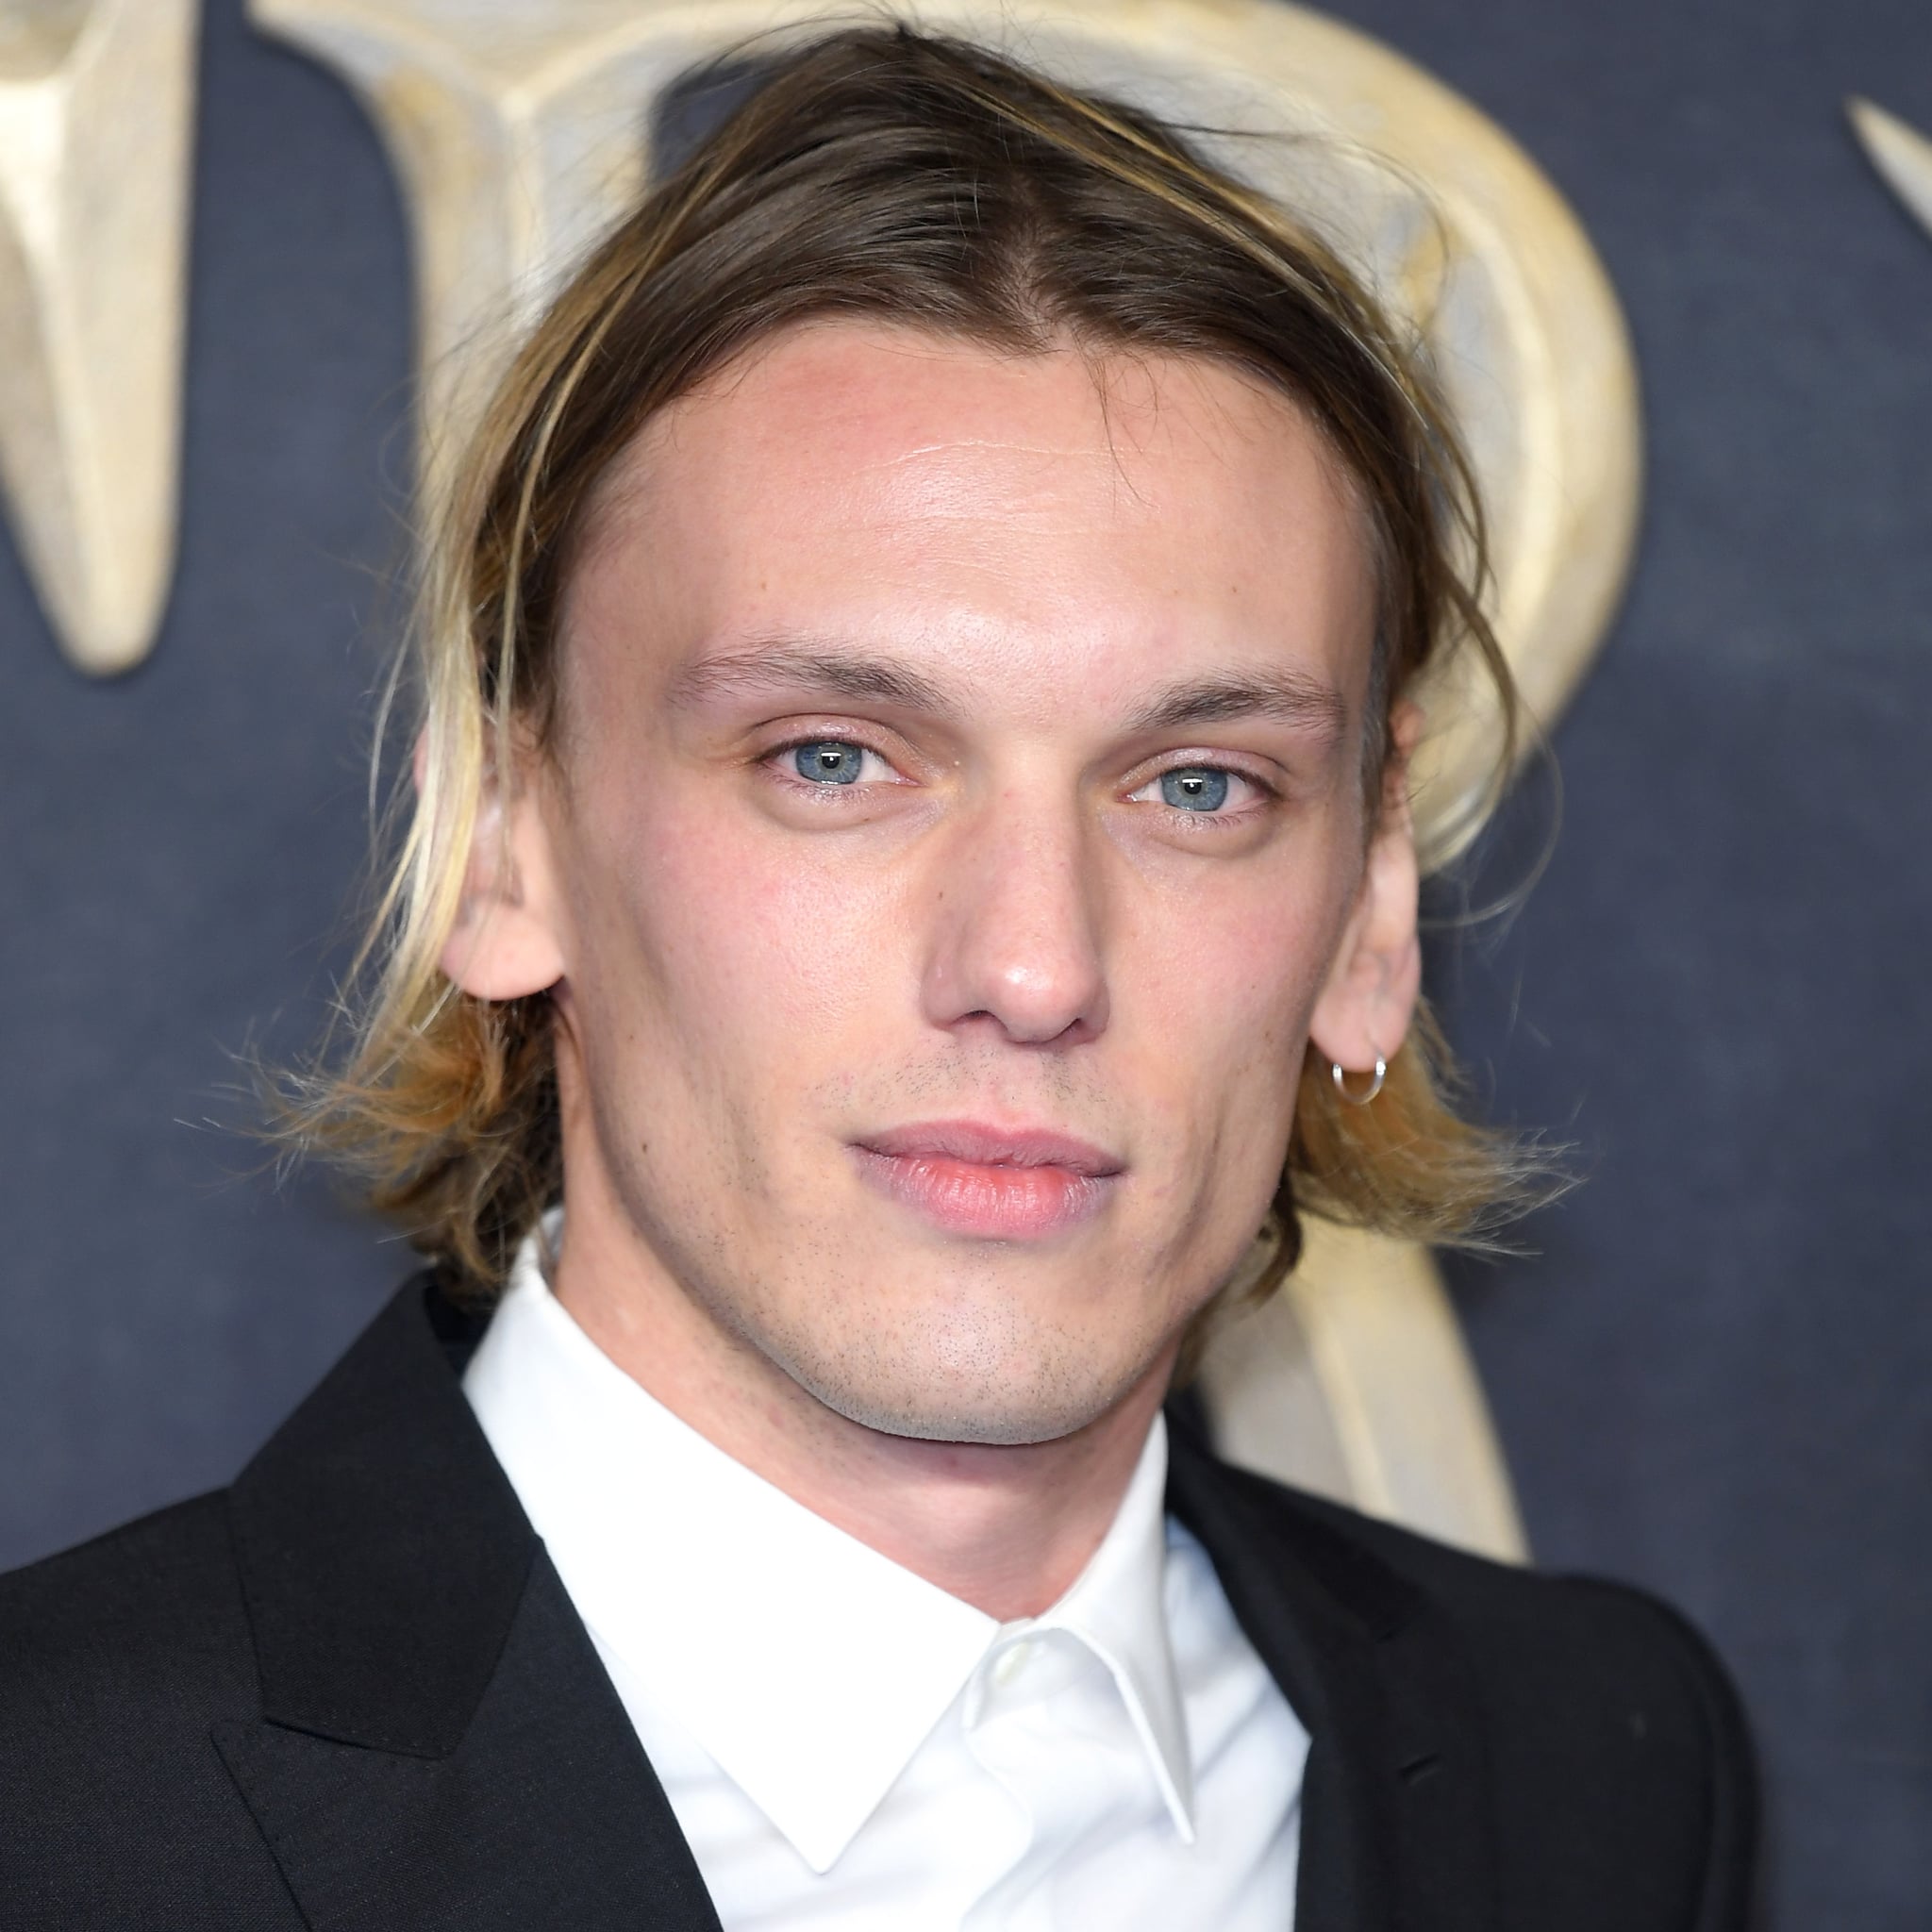 Jamie Campbell Bower Girlfriend 2022 When Did He And Lily Collins Split?